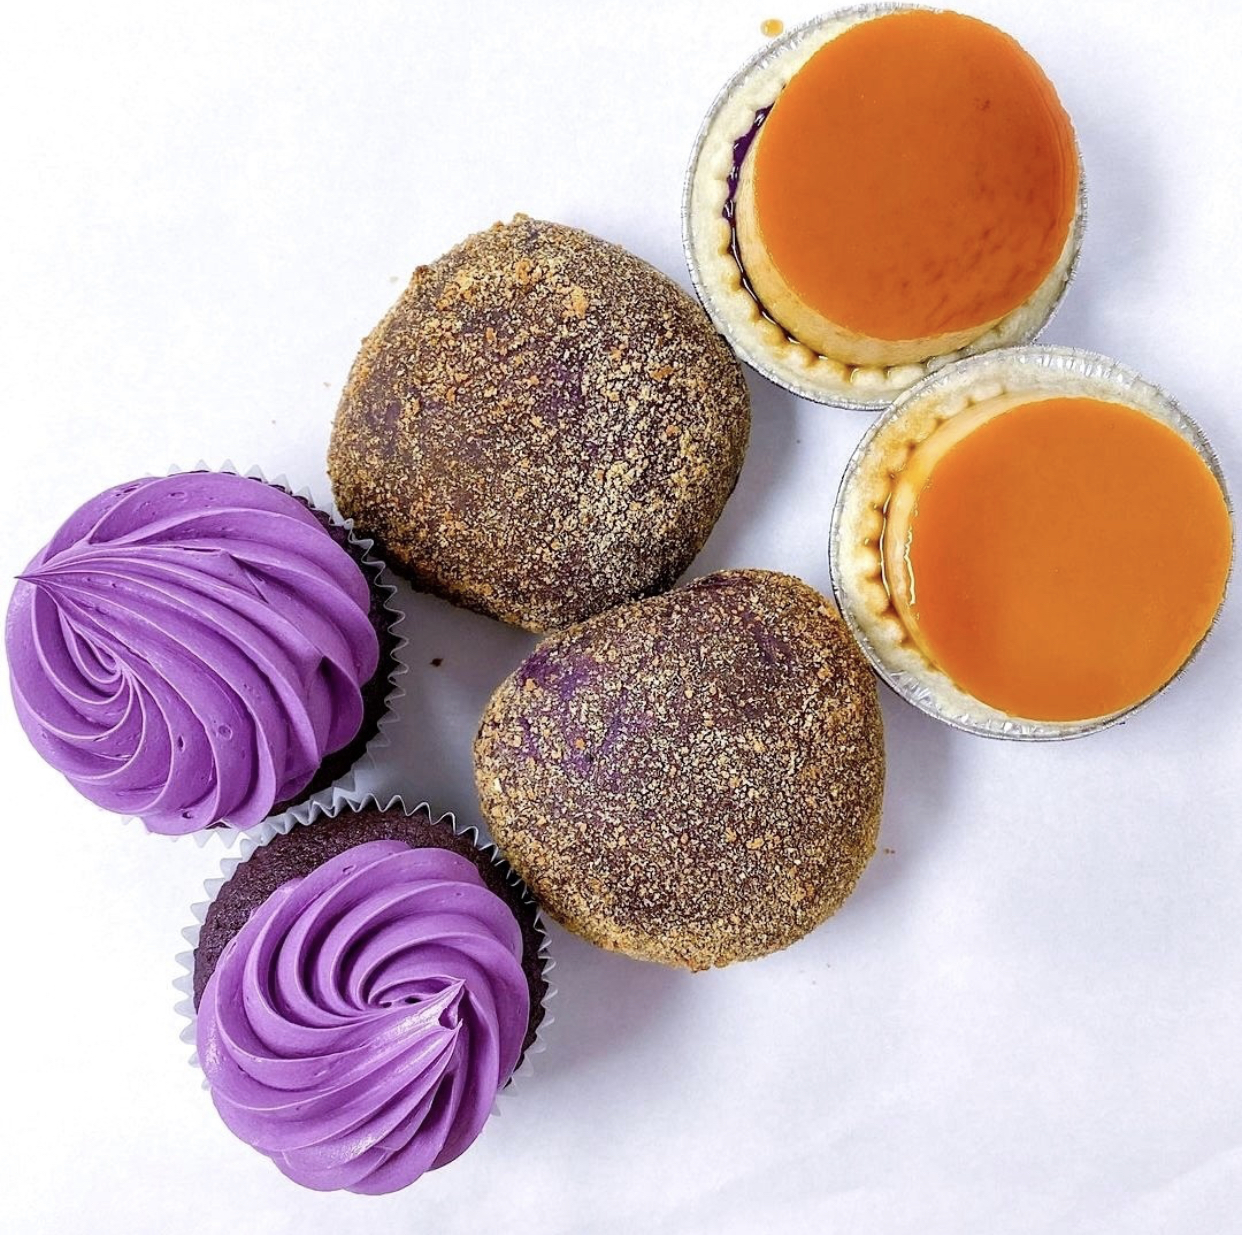 Two ube cupcakes, ube pandesals and ube flan cheesecakes, against a white background.